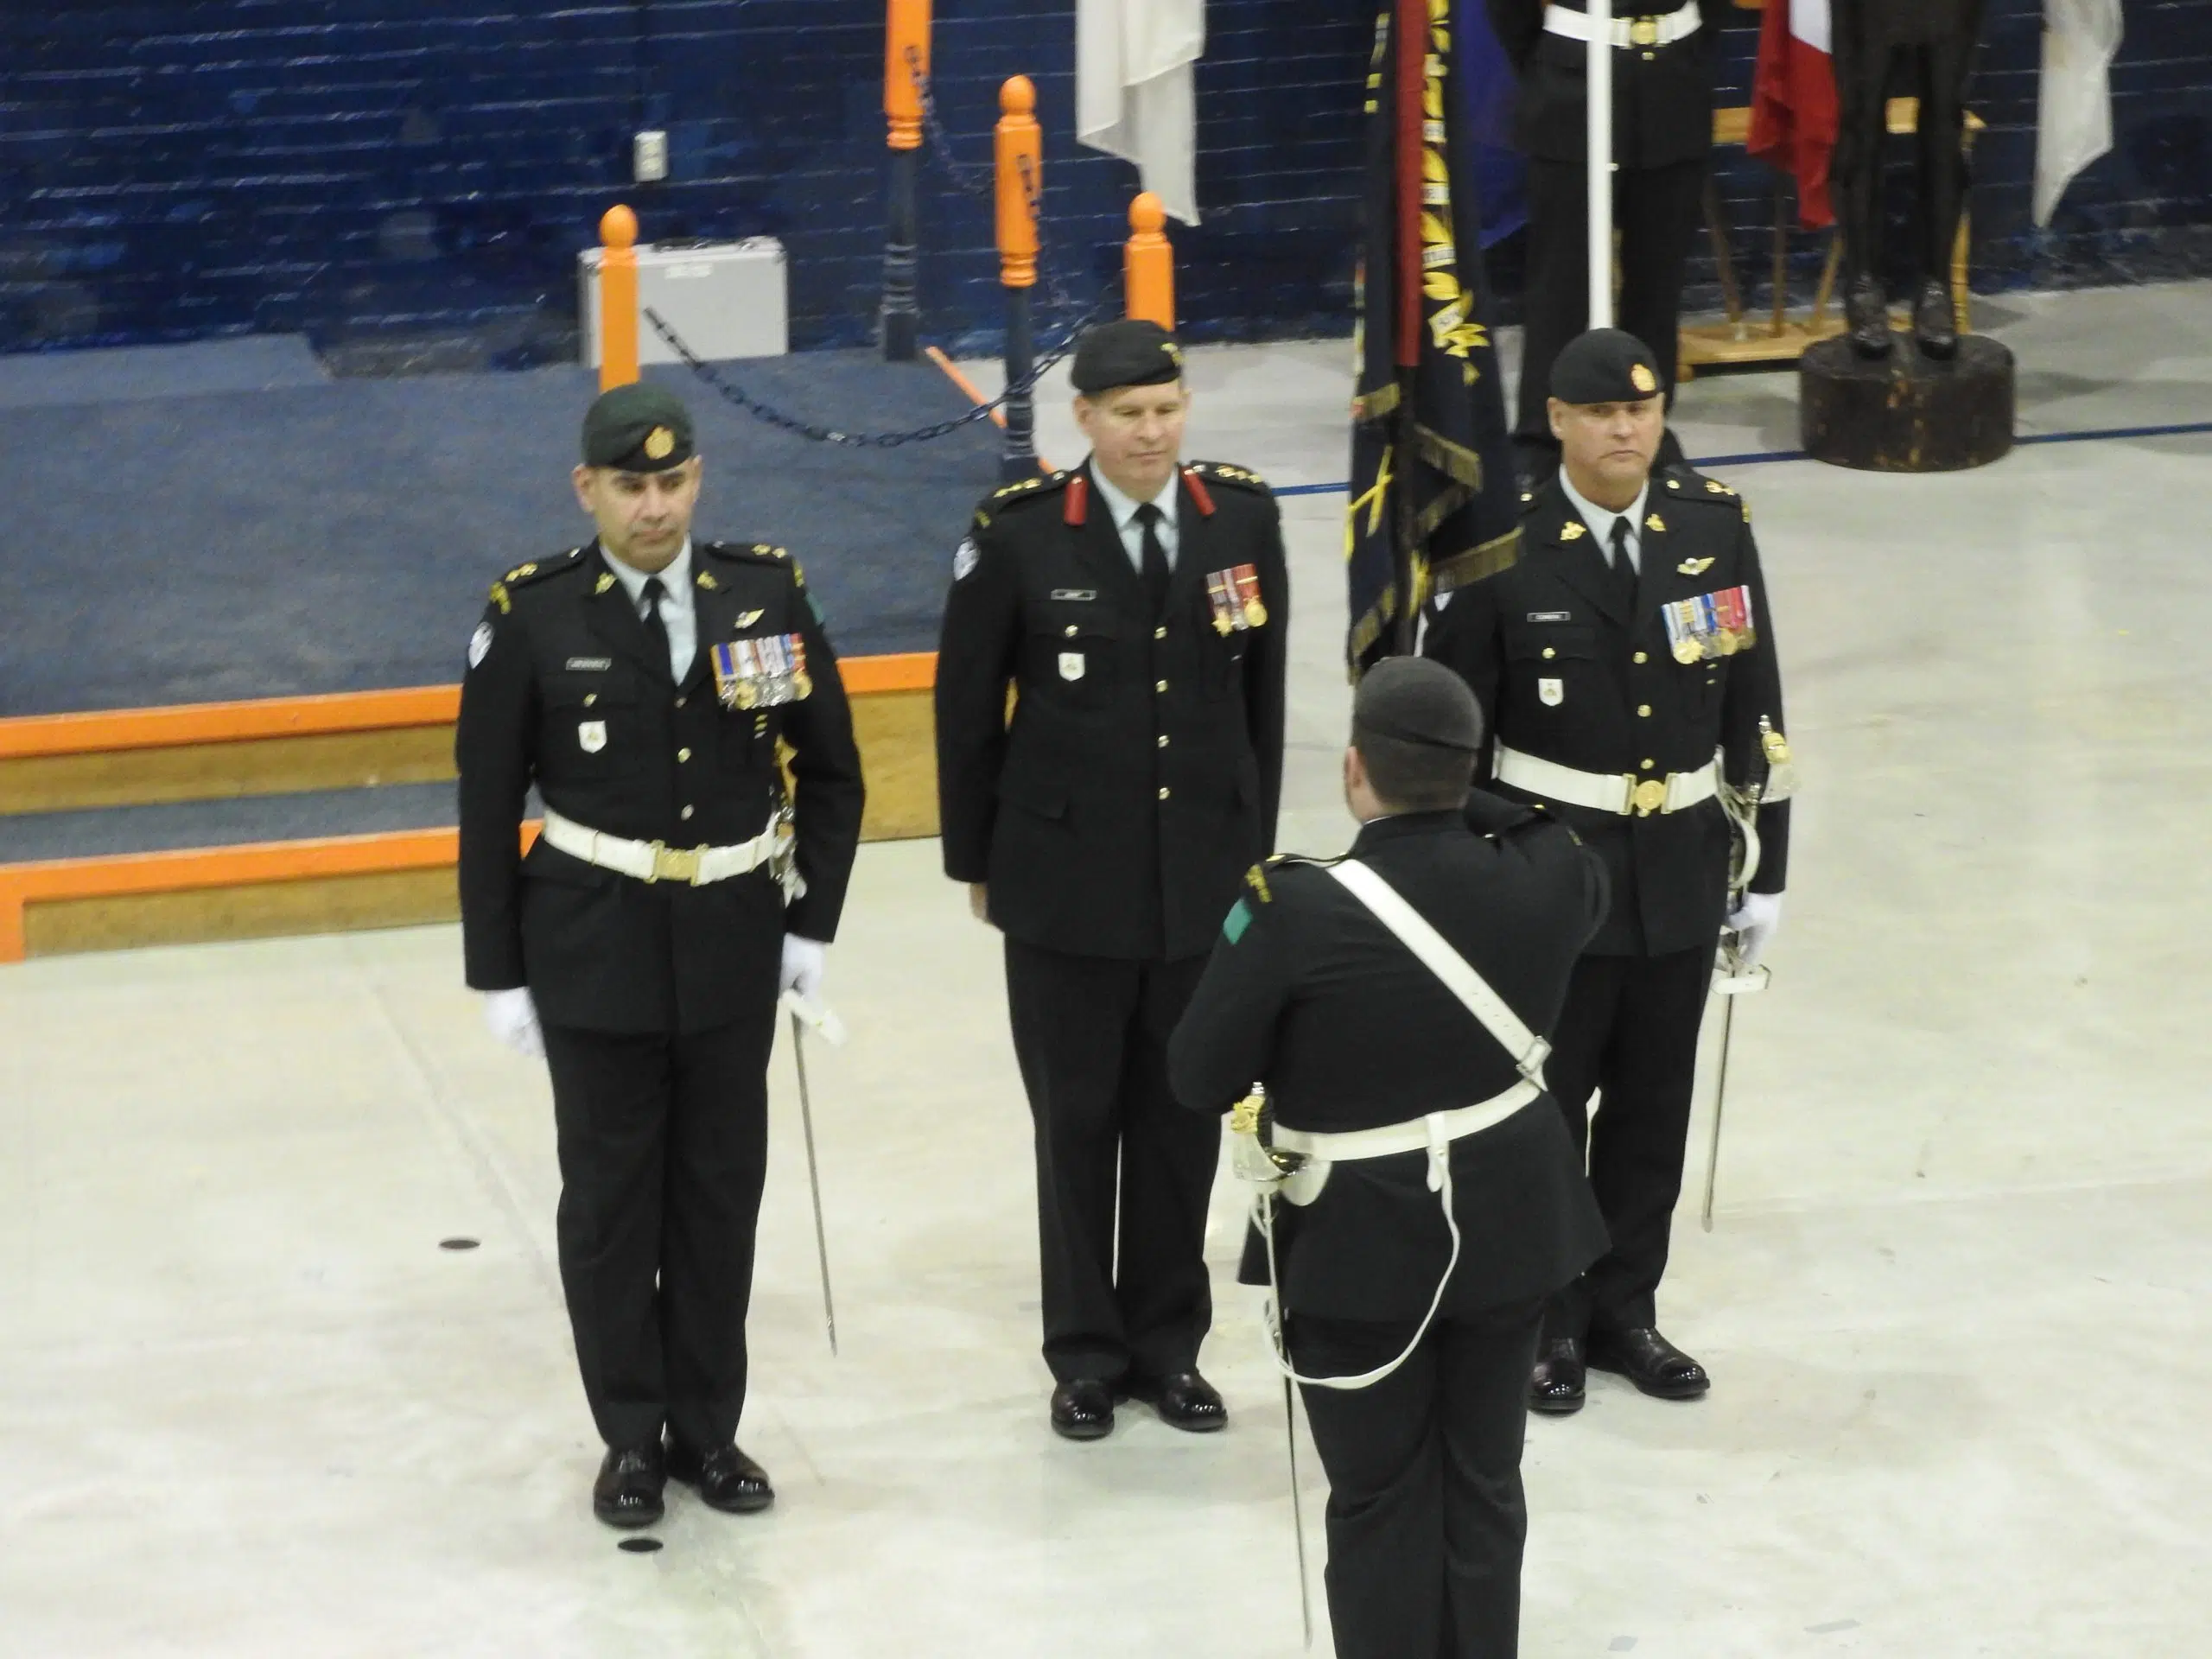 Change of command for the Hastings and Prince Edward Regiment 